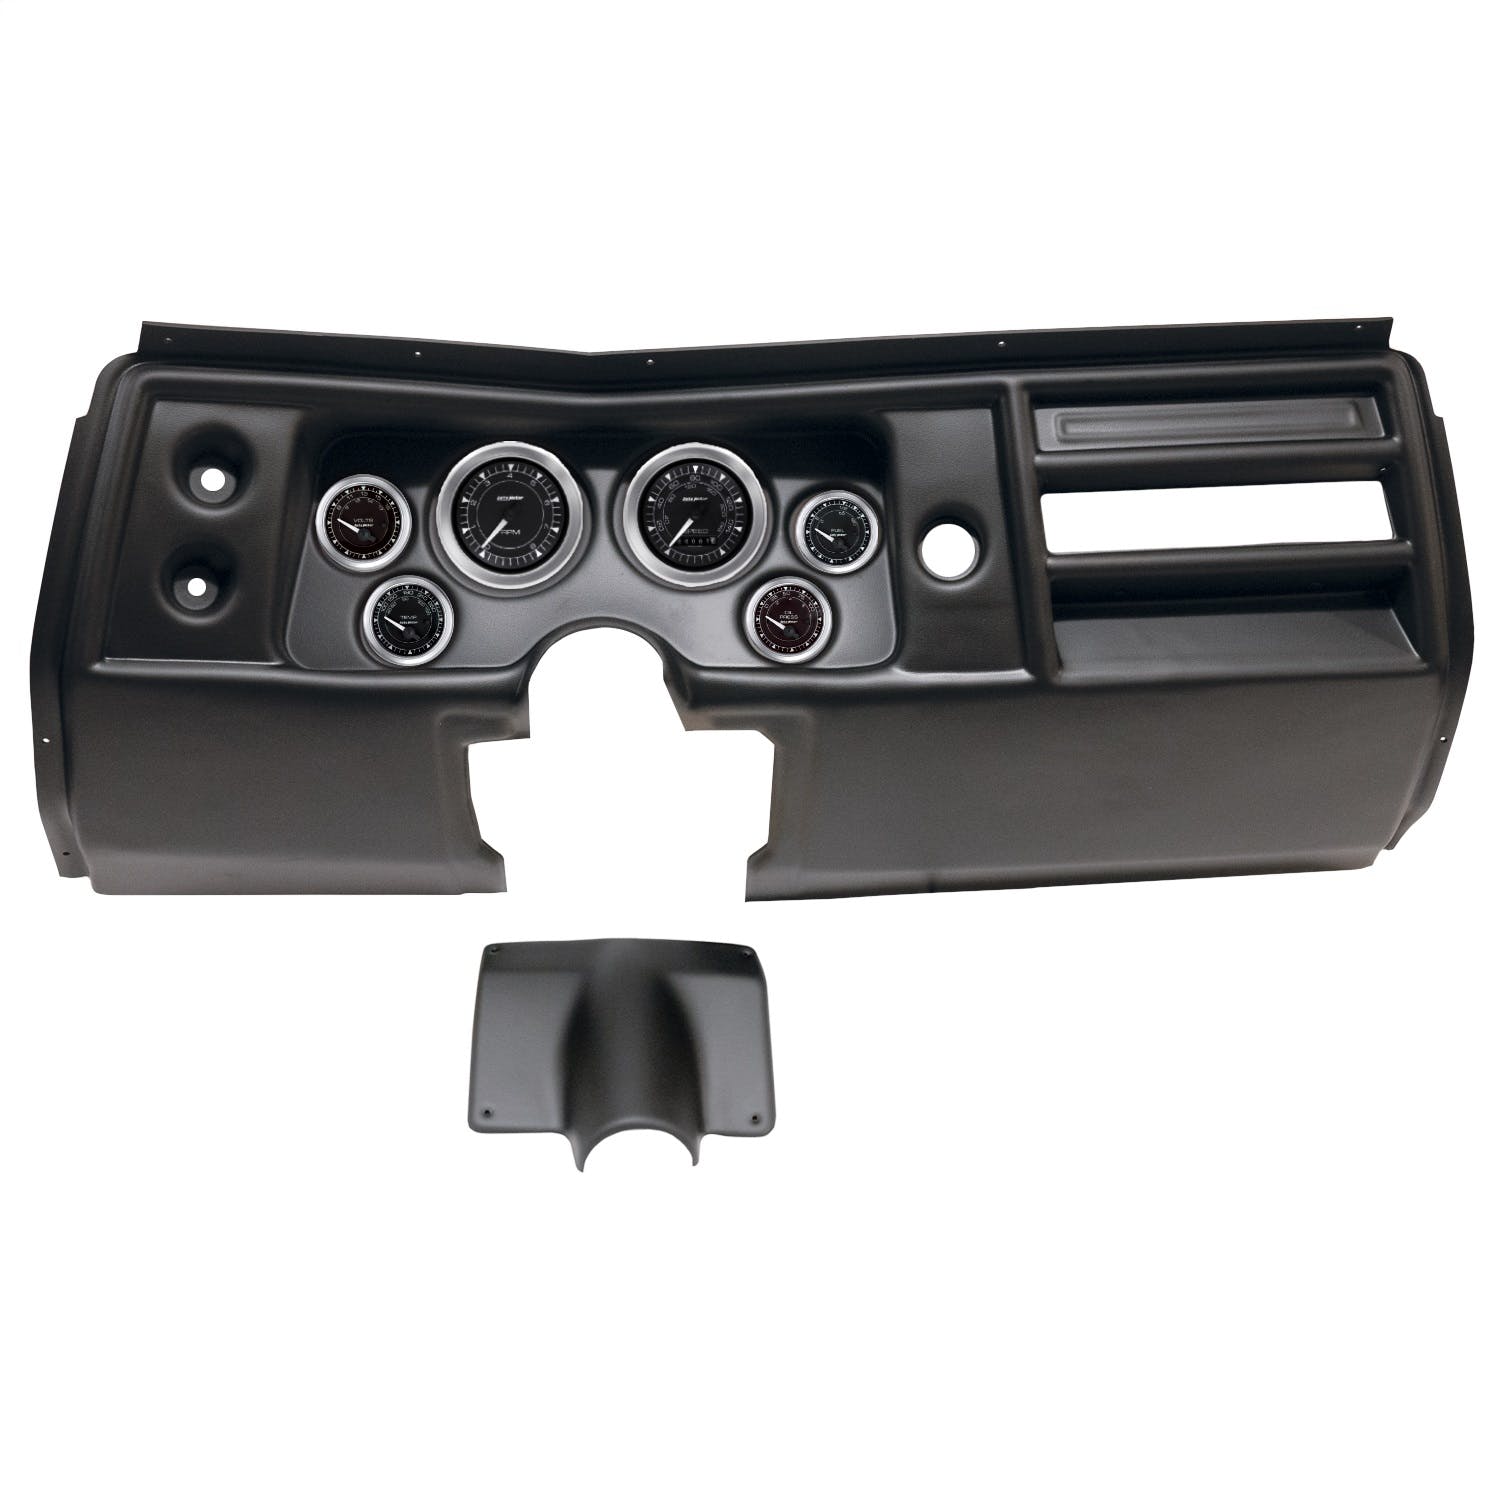 AutoMeter Products 2901-04 6 Gauge Direct-Fit Dash Kit, Chevy Chevelle No Vent 68, Chrono